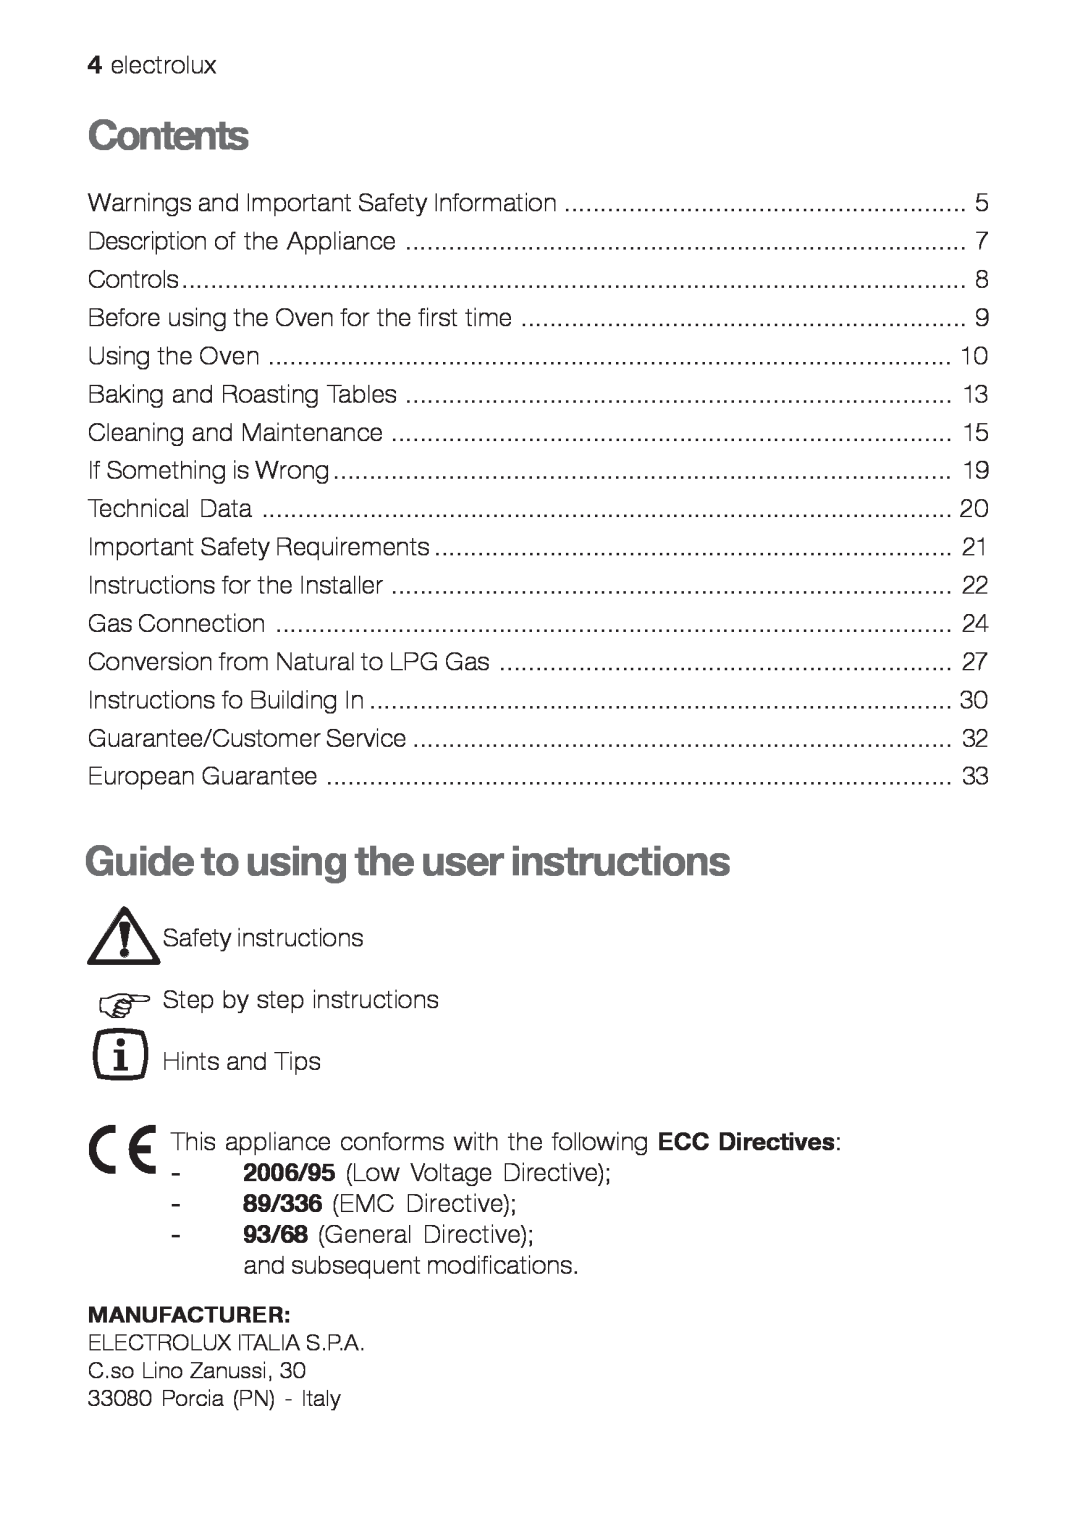 Electrolux EOG 10000 user manual Contents, Guide to using the user instructions 